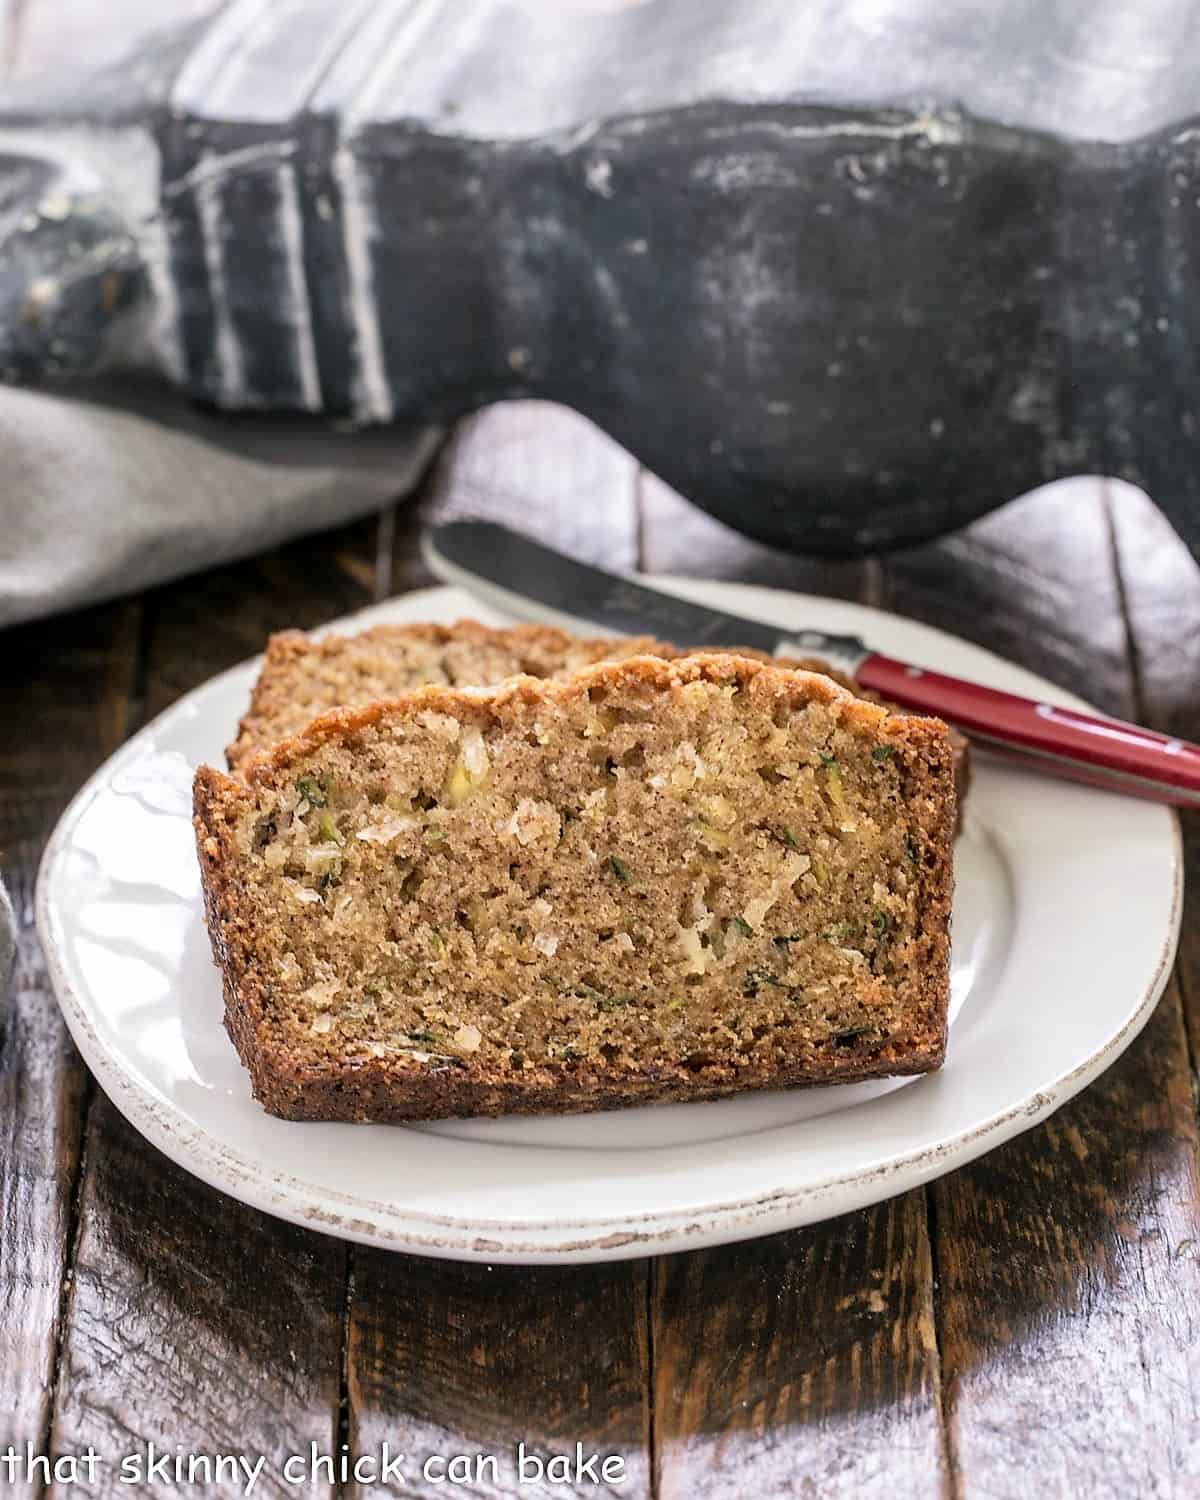 Slices of zucchini bread recipe on a white plate with a red handled knife.